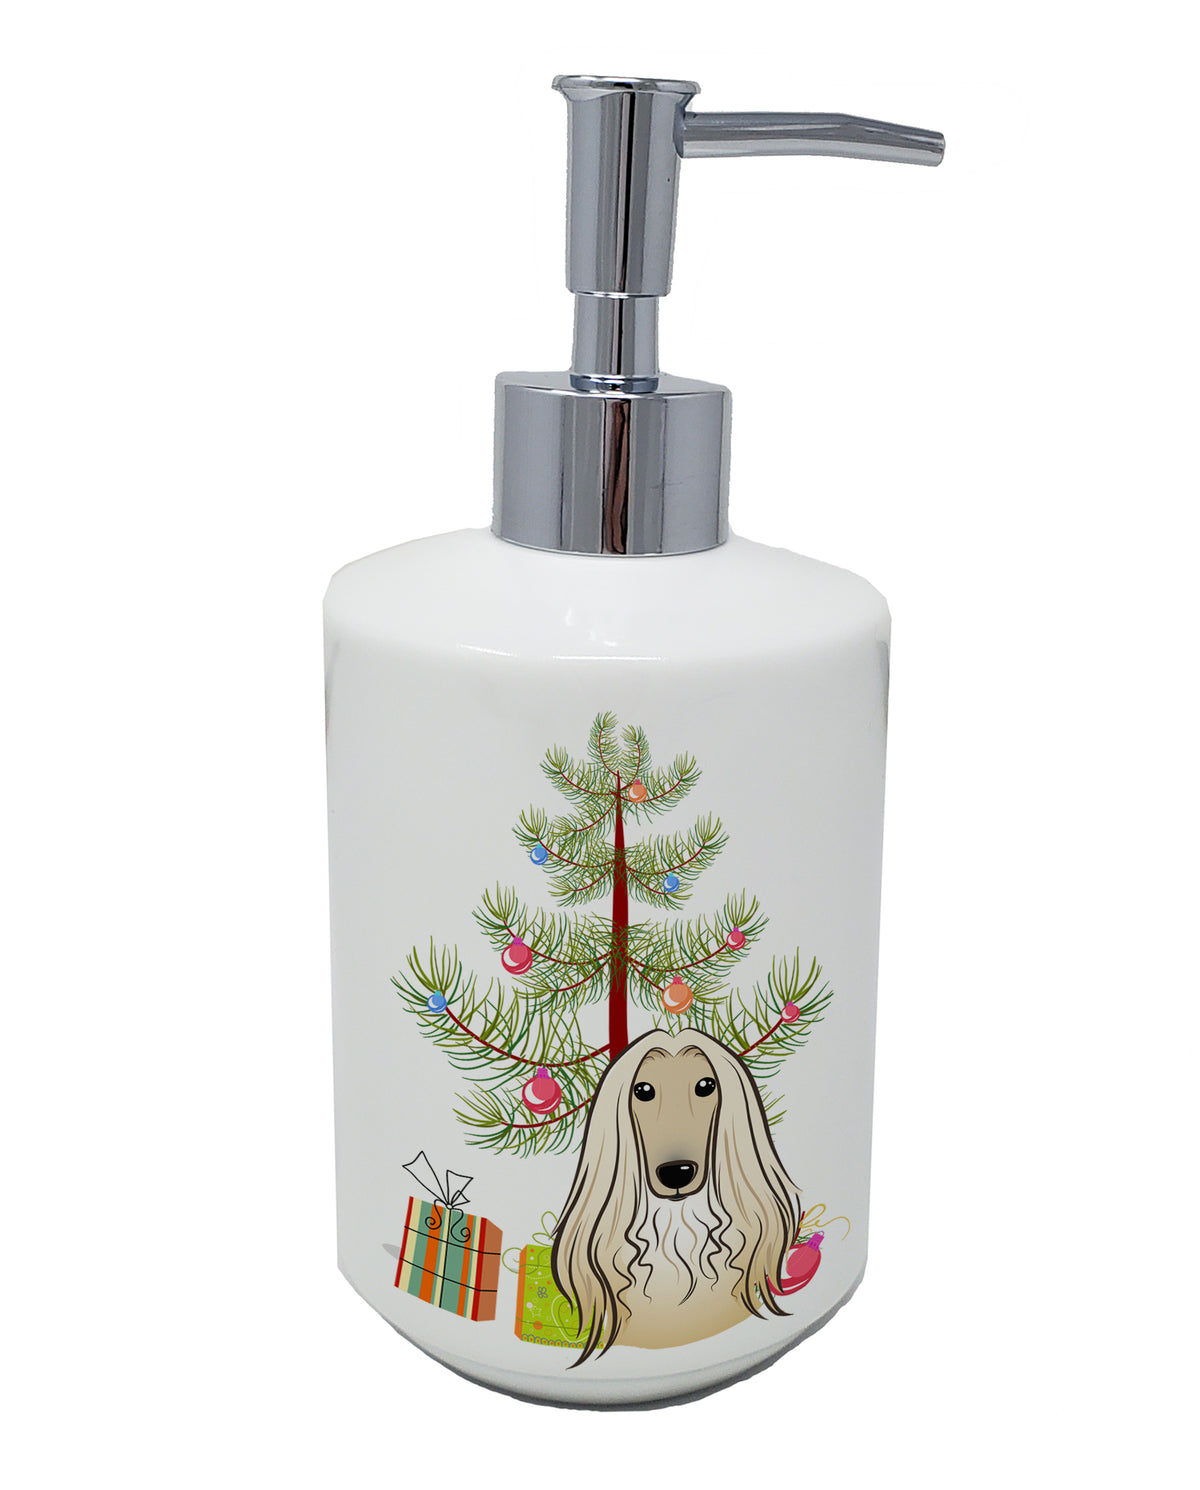 Buy this Christmas Tree and Afghan Hound Ceramic Soap Dispenser